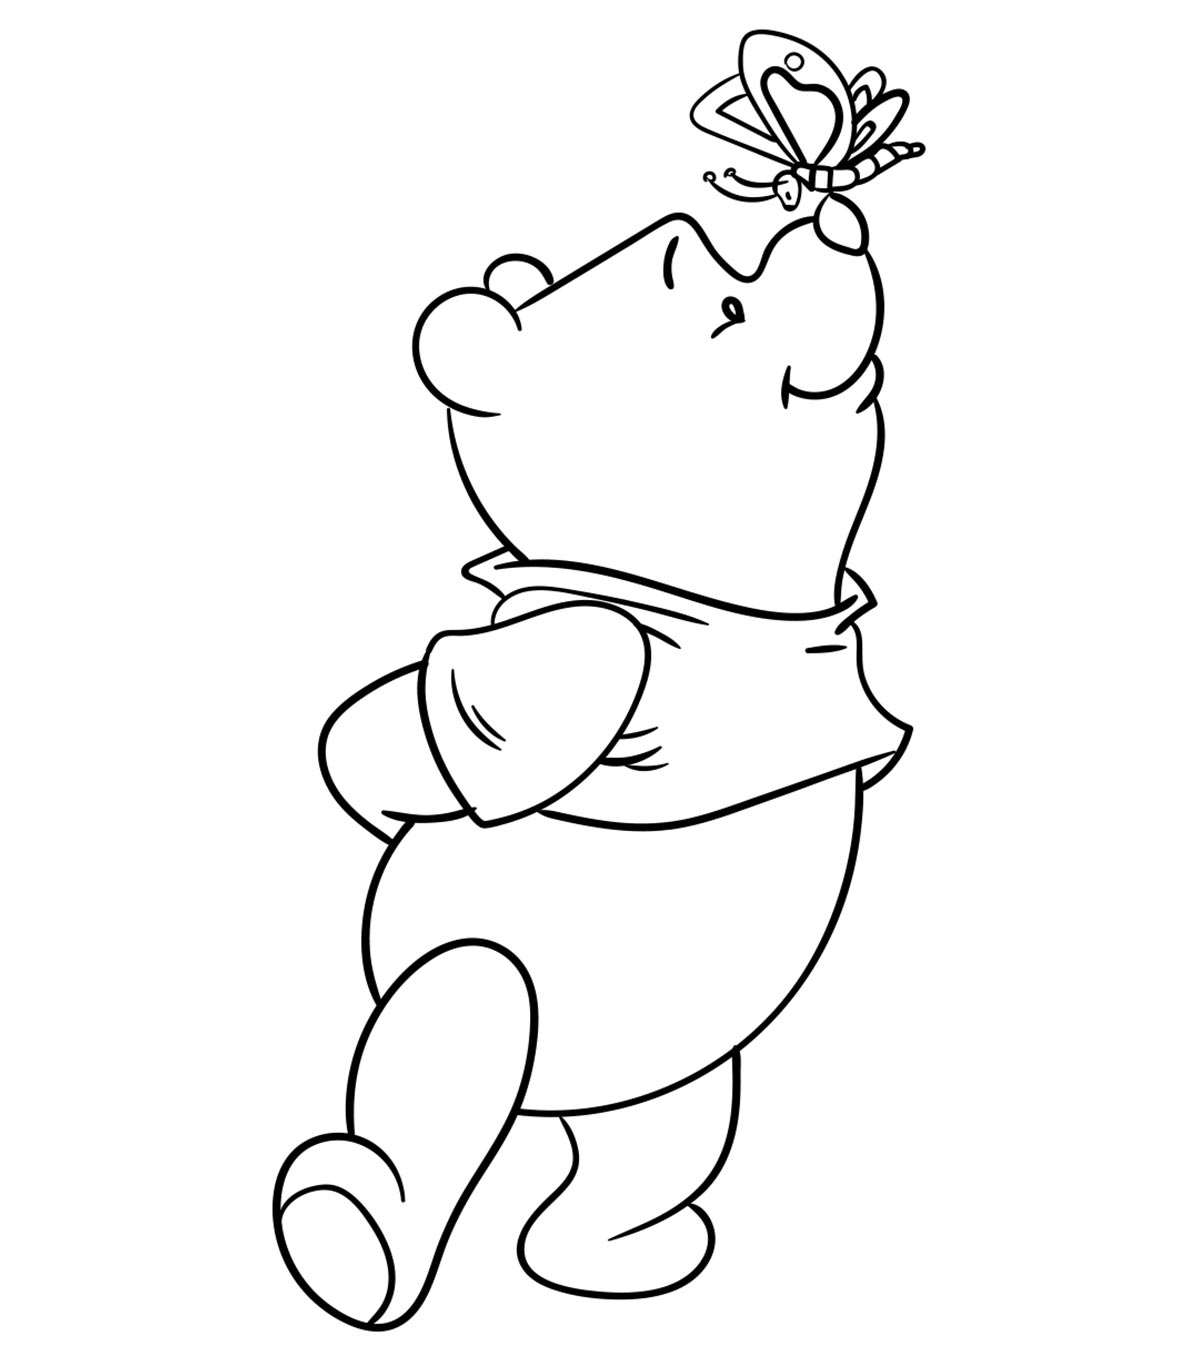 Winnie The Pooh Coloring Pages Online Coloring Pages Top Free Printableute Winnie The Pooholoring Pages